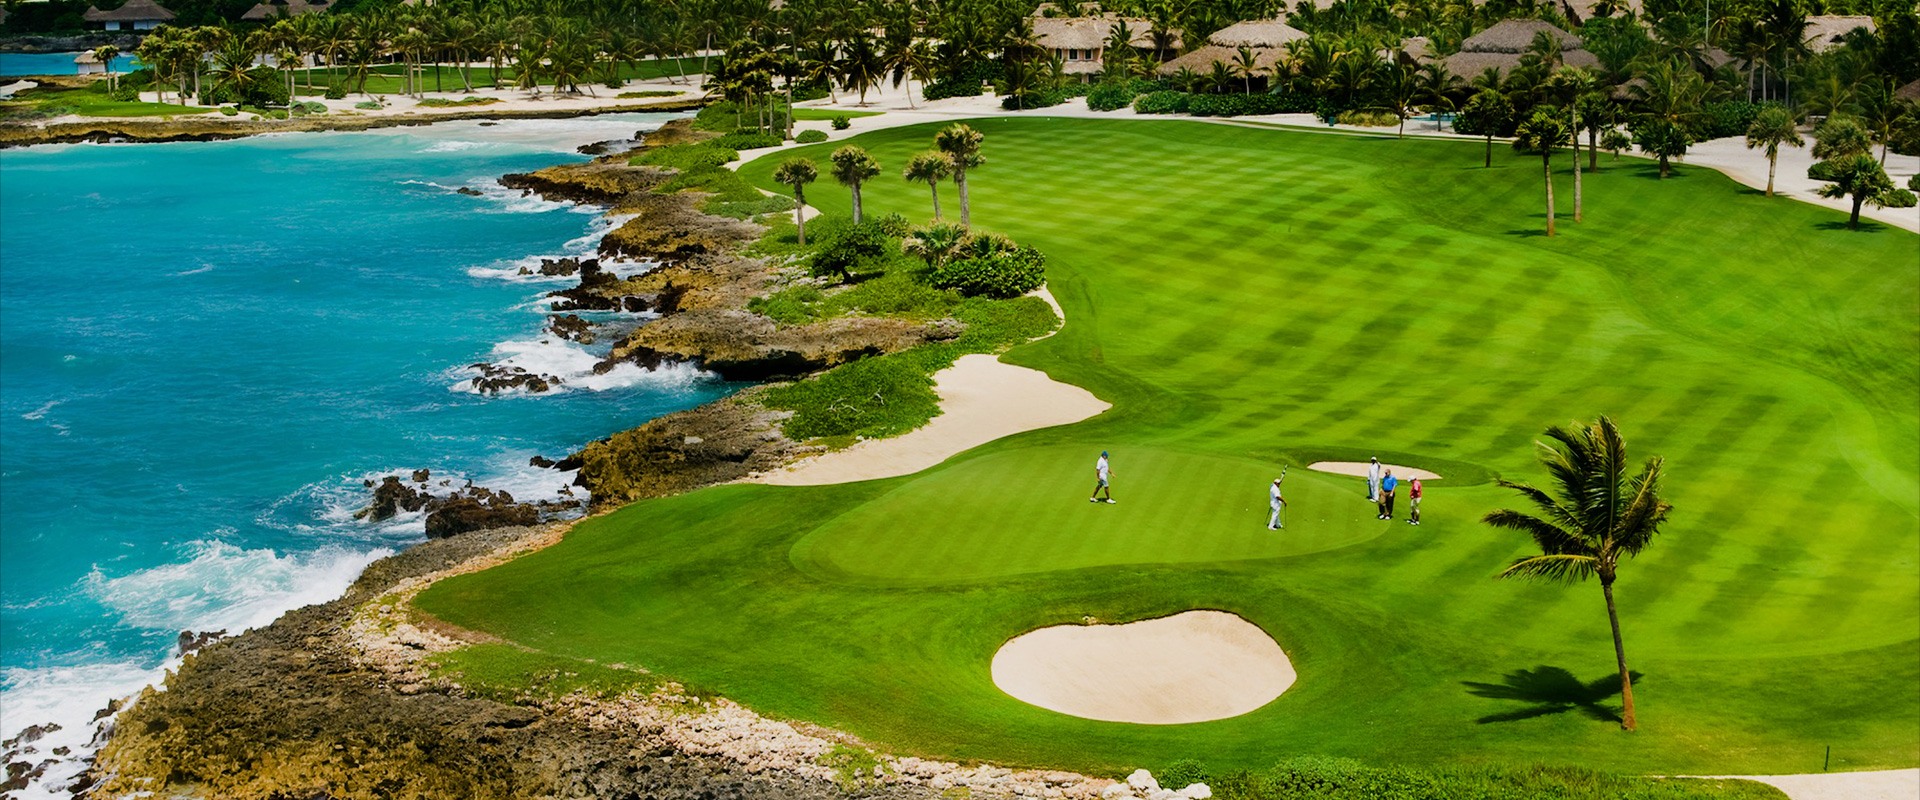 Golfweek’s Best courses 2022: Mexico, Caribbean, Atlantic islands and Central America